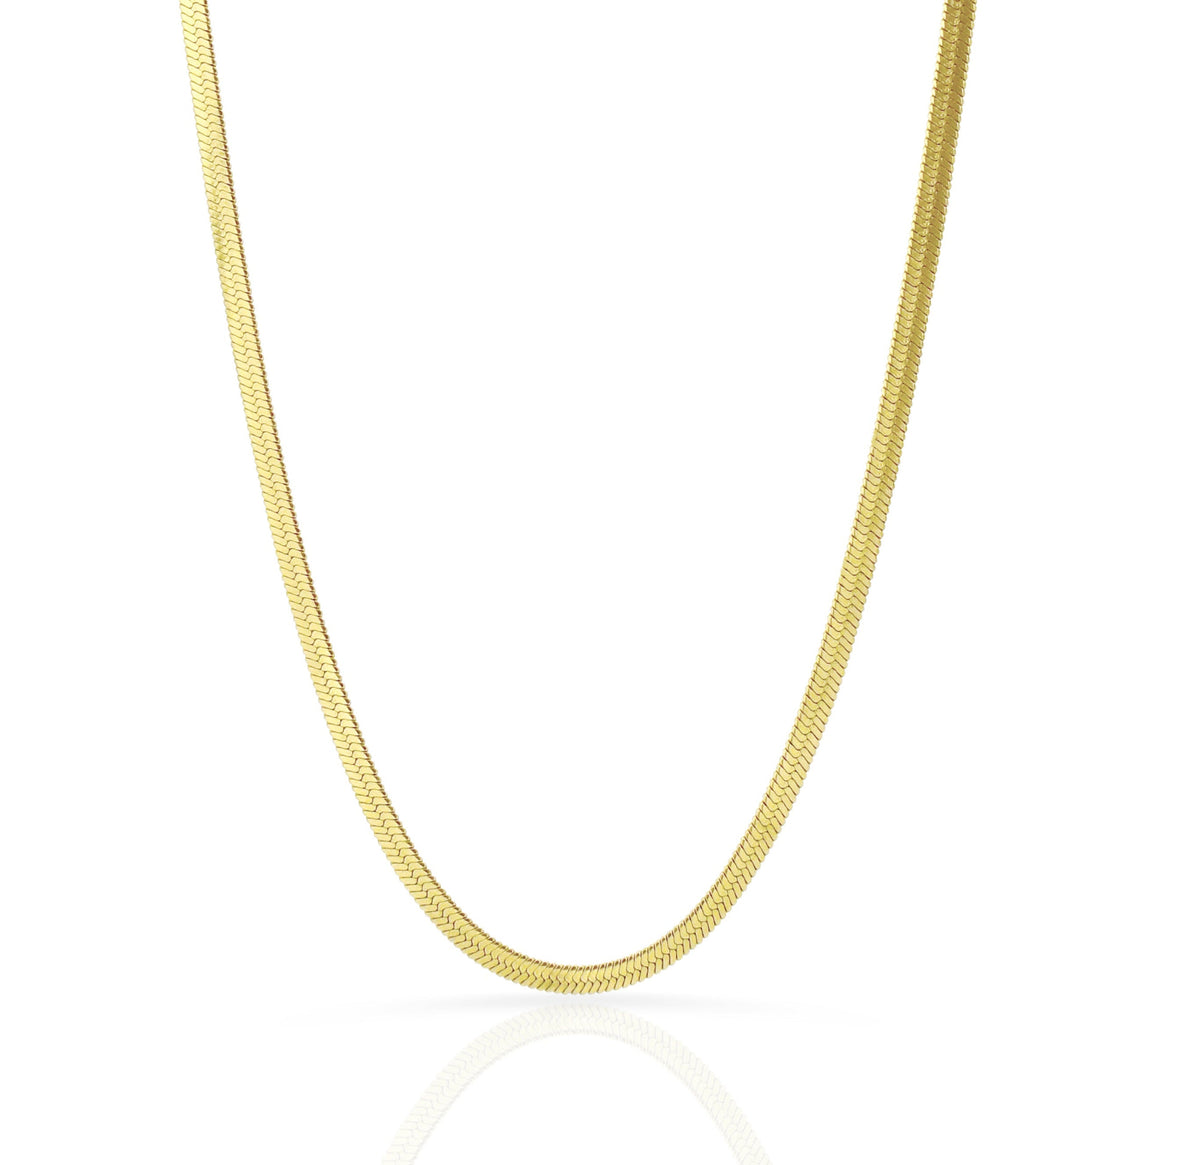 4MM GOLD THIN SNAKE CHAIN NECKLACE -SAMPLE